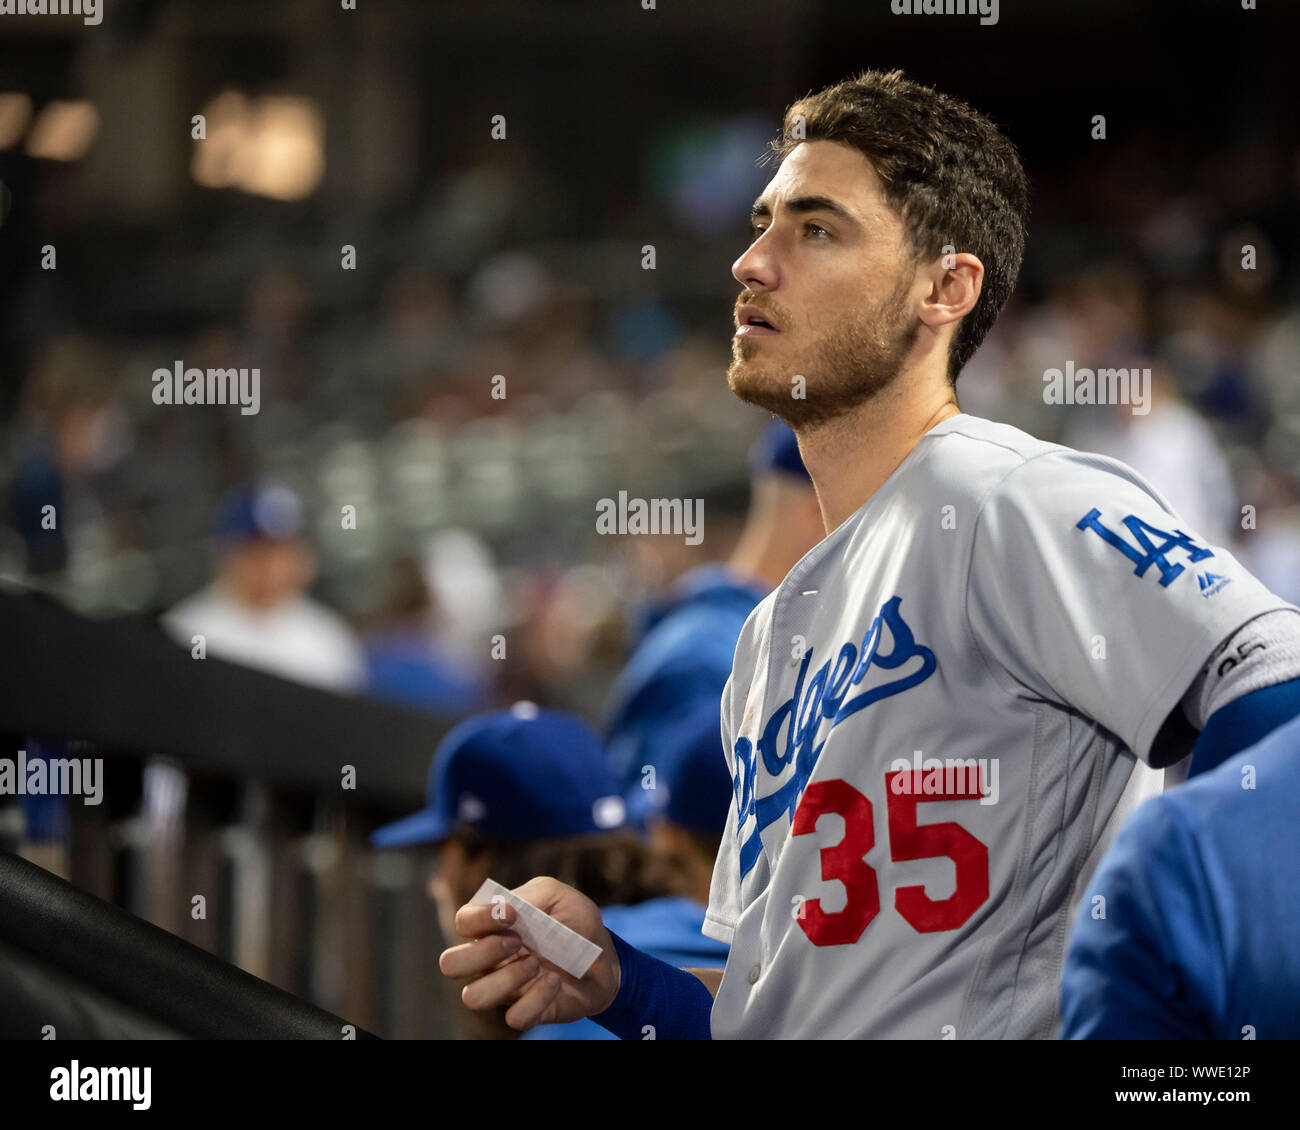 Queens, New York, USA. 13th Sep, 2019. Los Angeles Dodgers right fielder Cody Bellinger (35) looks on from the dugout during the game between The New York Mets and The Los Angeles Dodgers at Citi Field in Queens, New York. Mandatory credit: Kostas Lymperopoulos/CSM/Alamy Live News Stock Photo